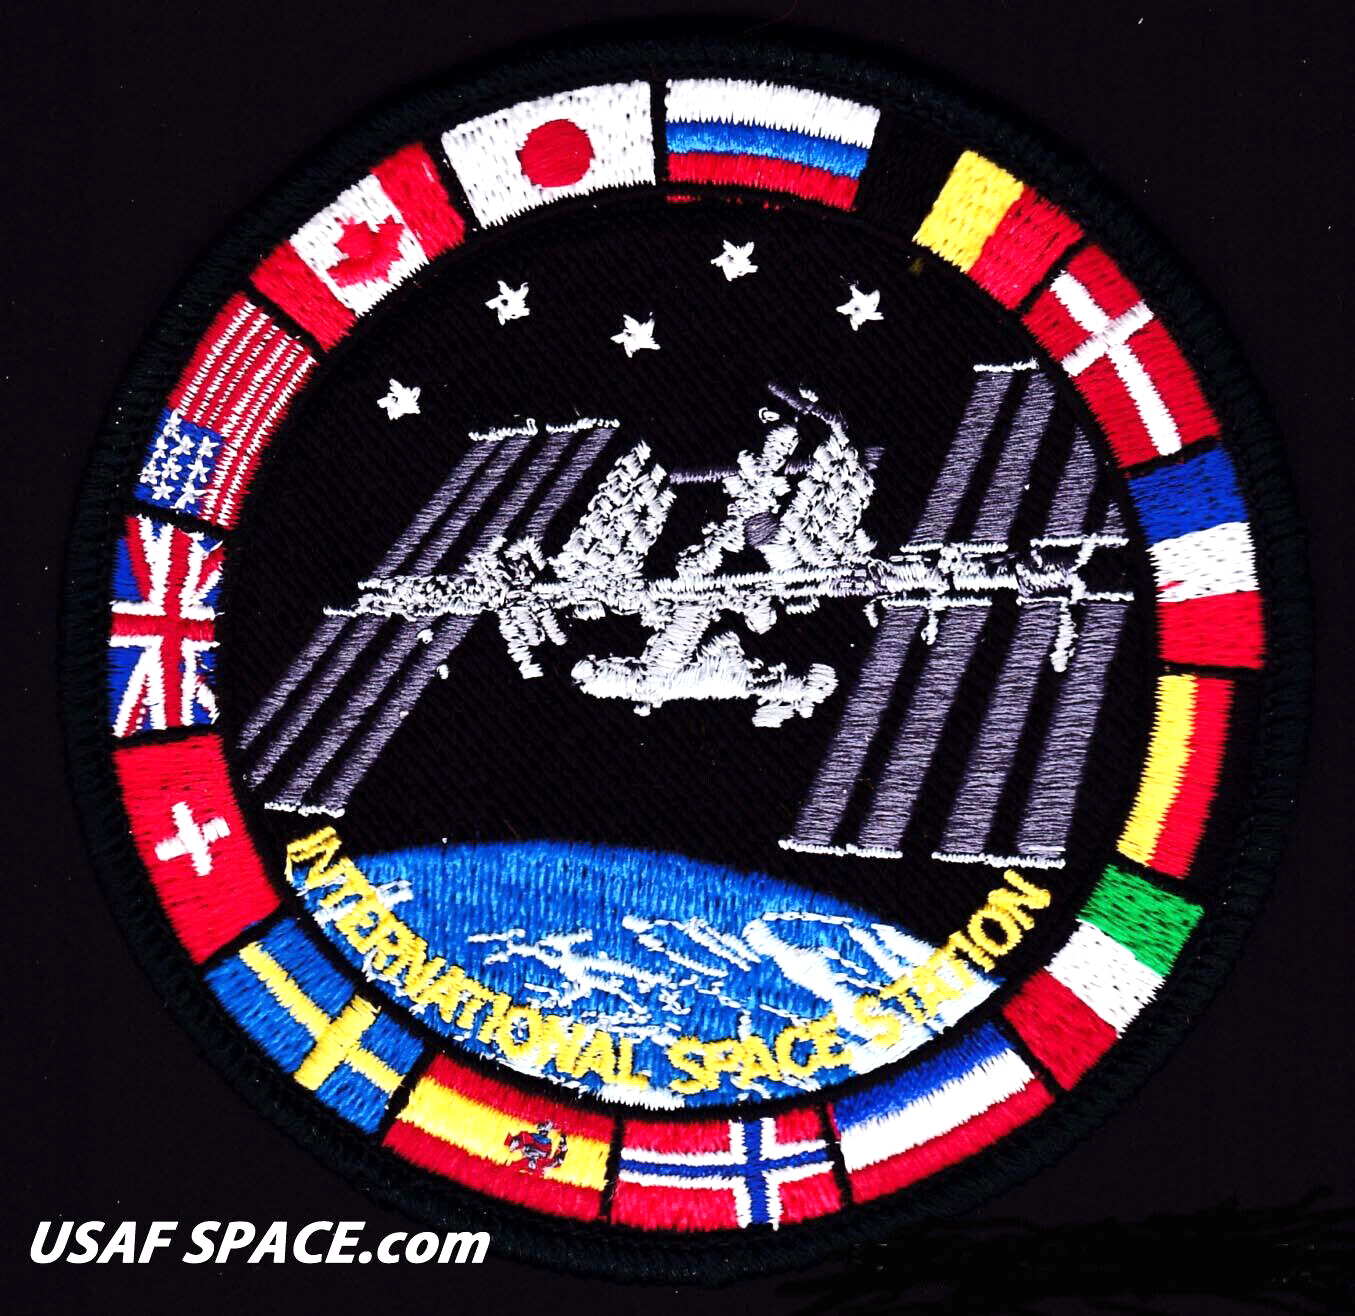 AUTHENTIC AB Emblem ISS - International Space Station - FLAGS - NASA SPACE PATCH